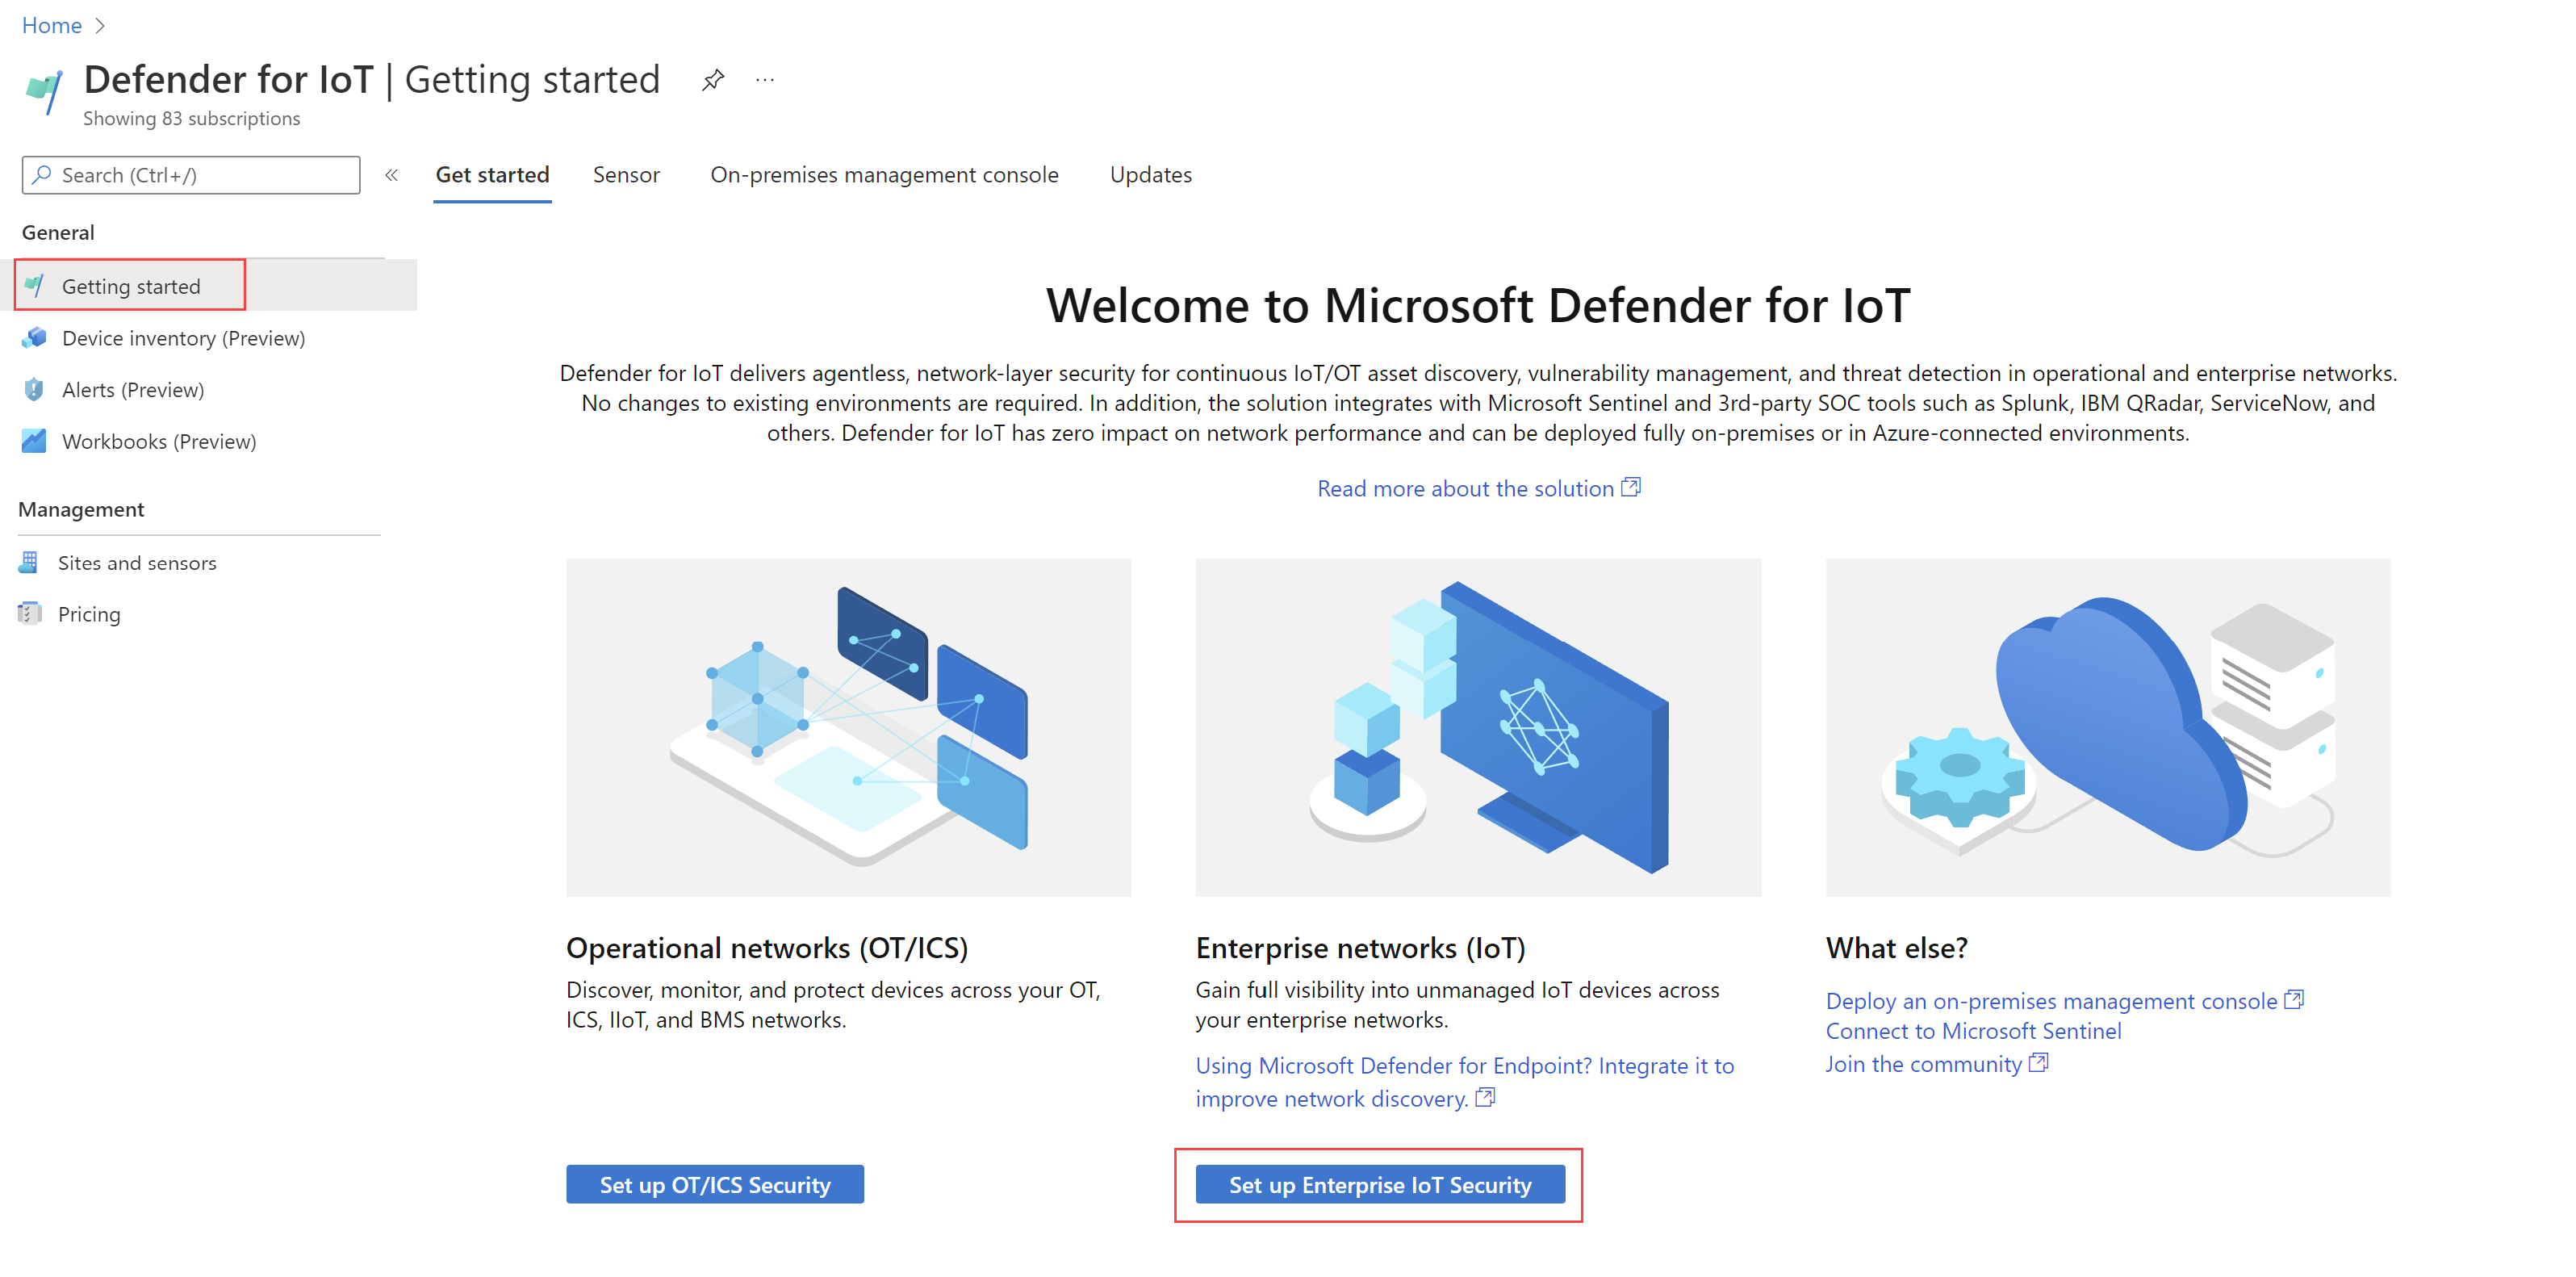 Screenshot of the Getting started page for Enterprise IoT security.